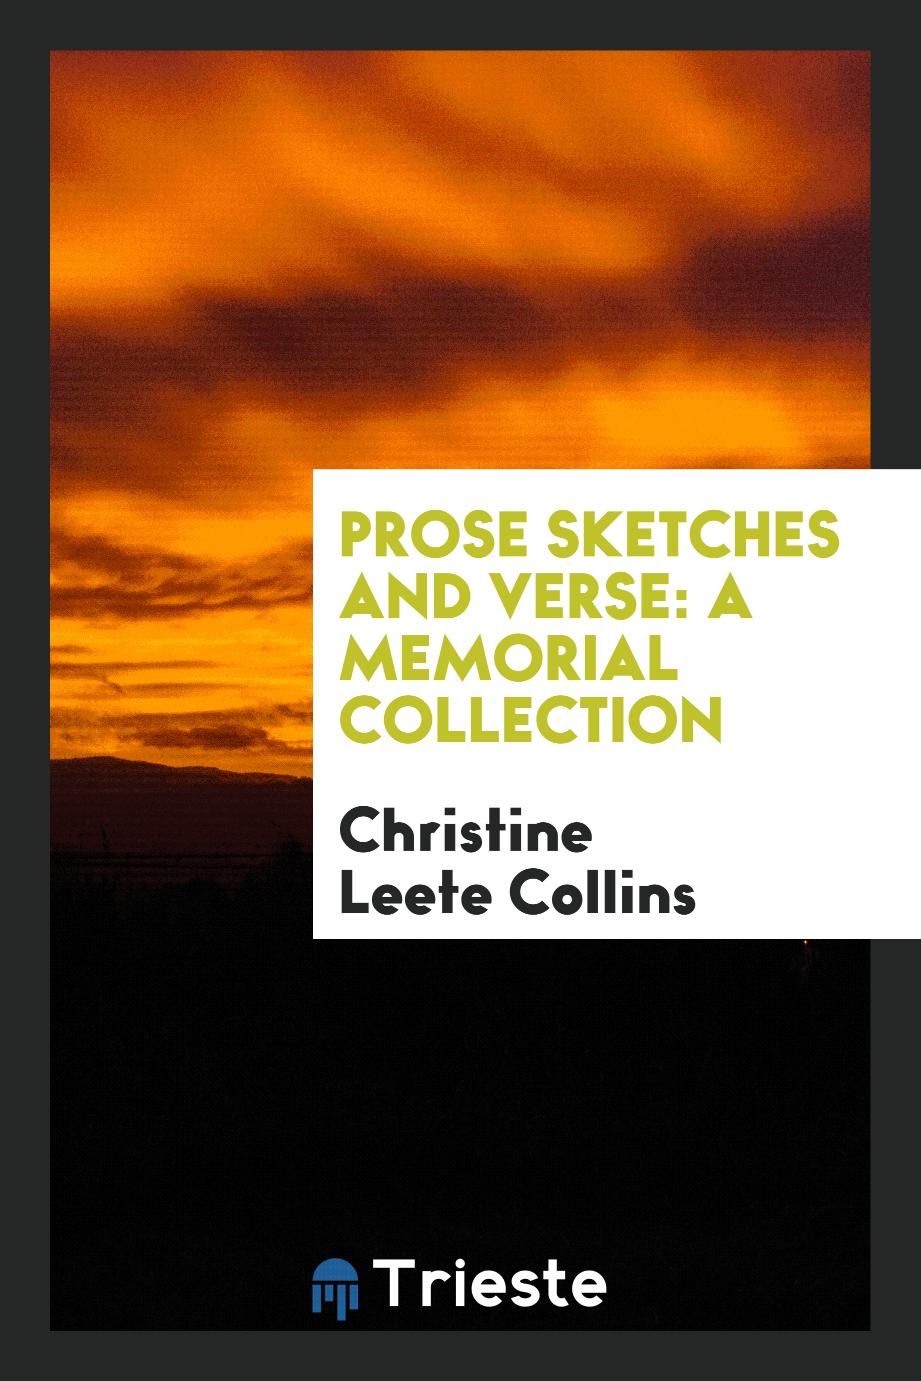 Prose sketches and verse: a memorial collection